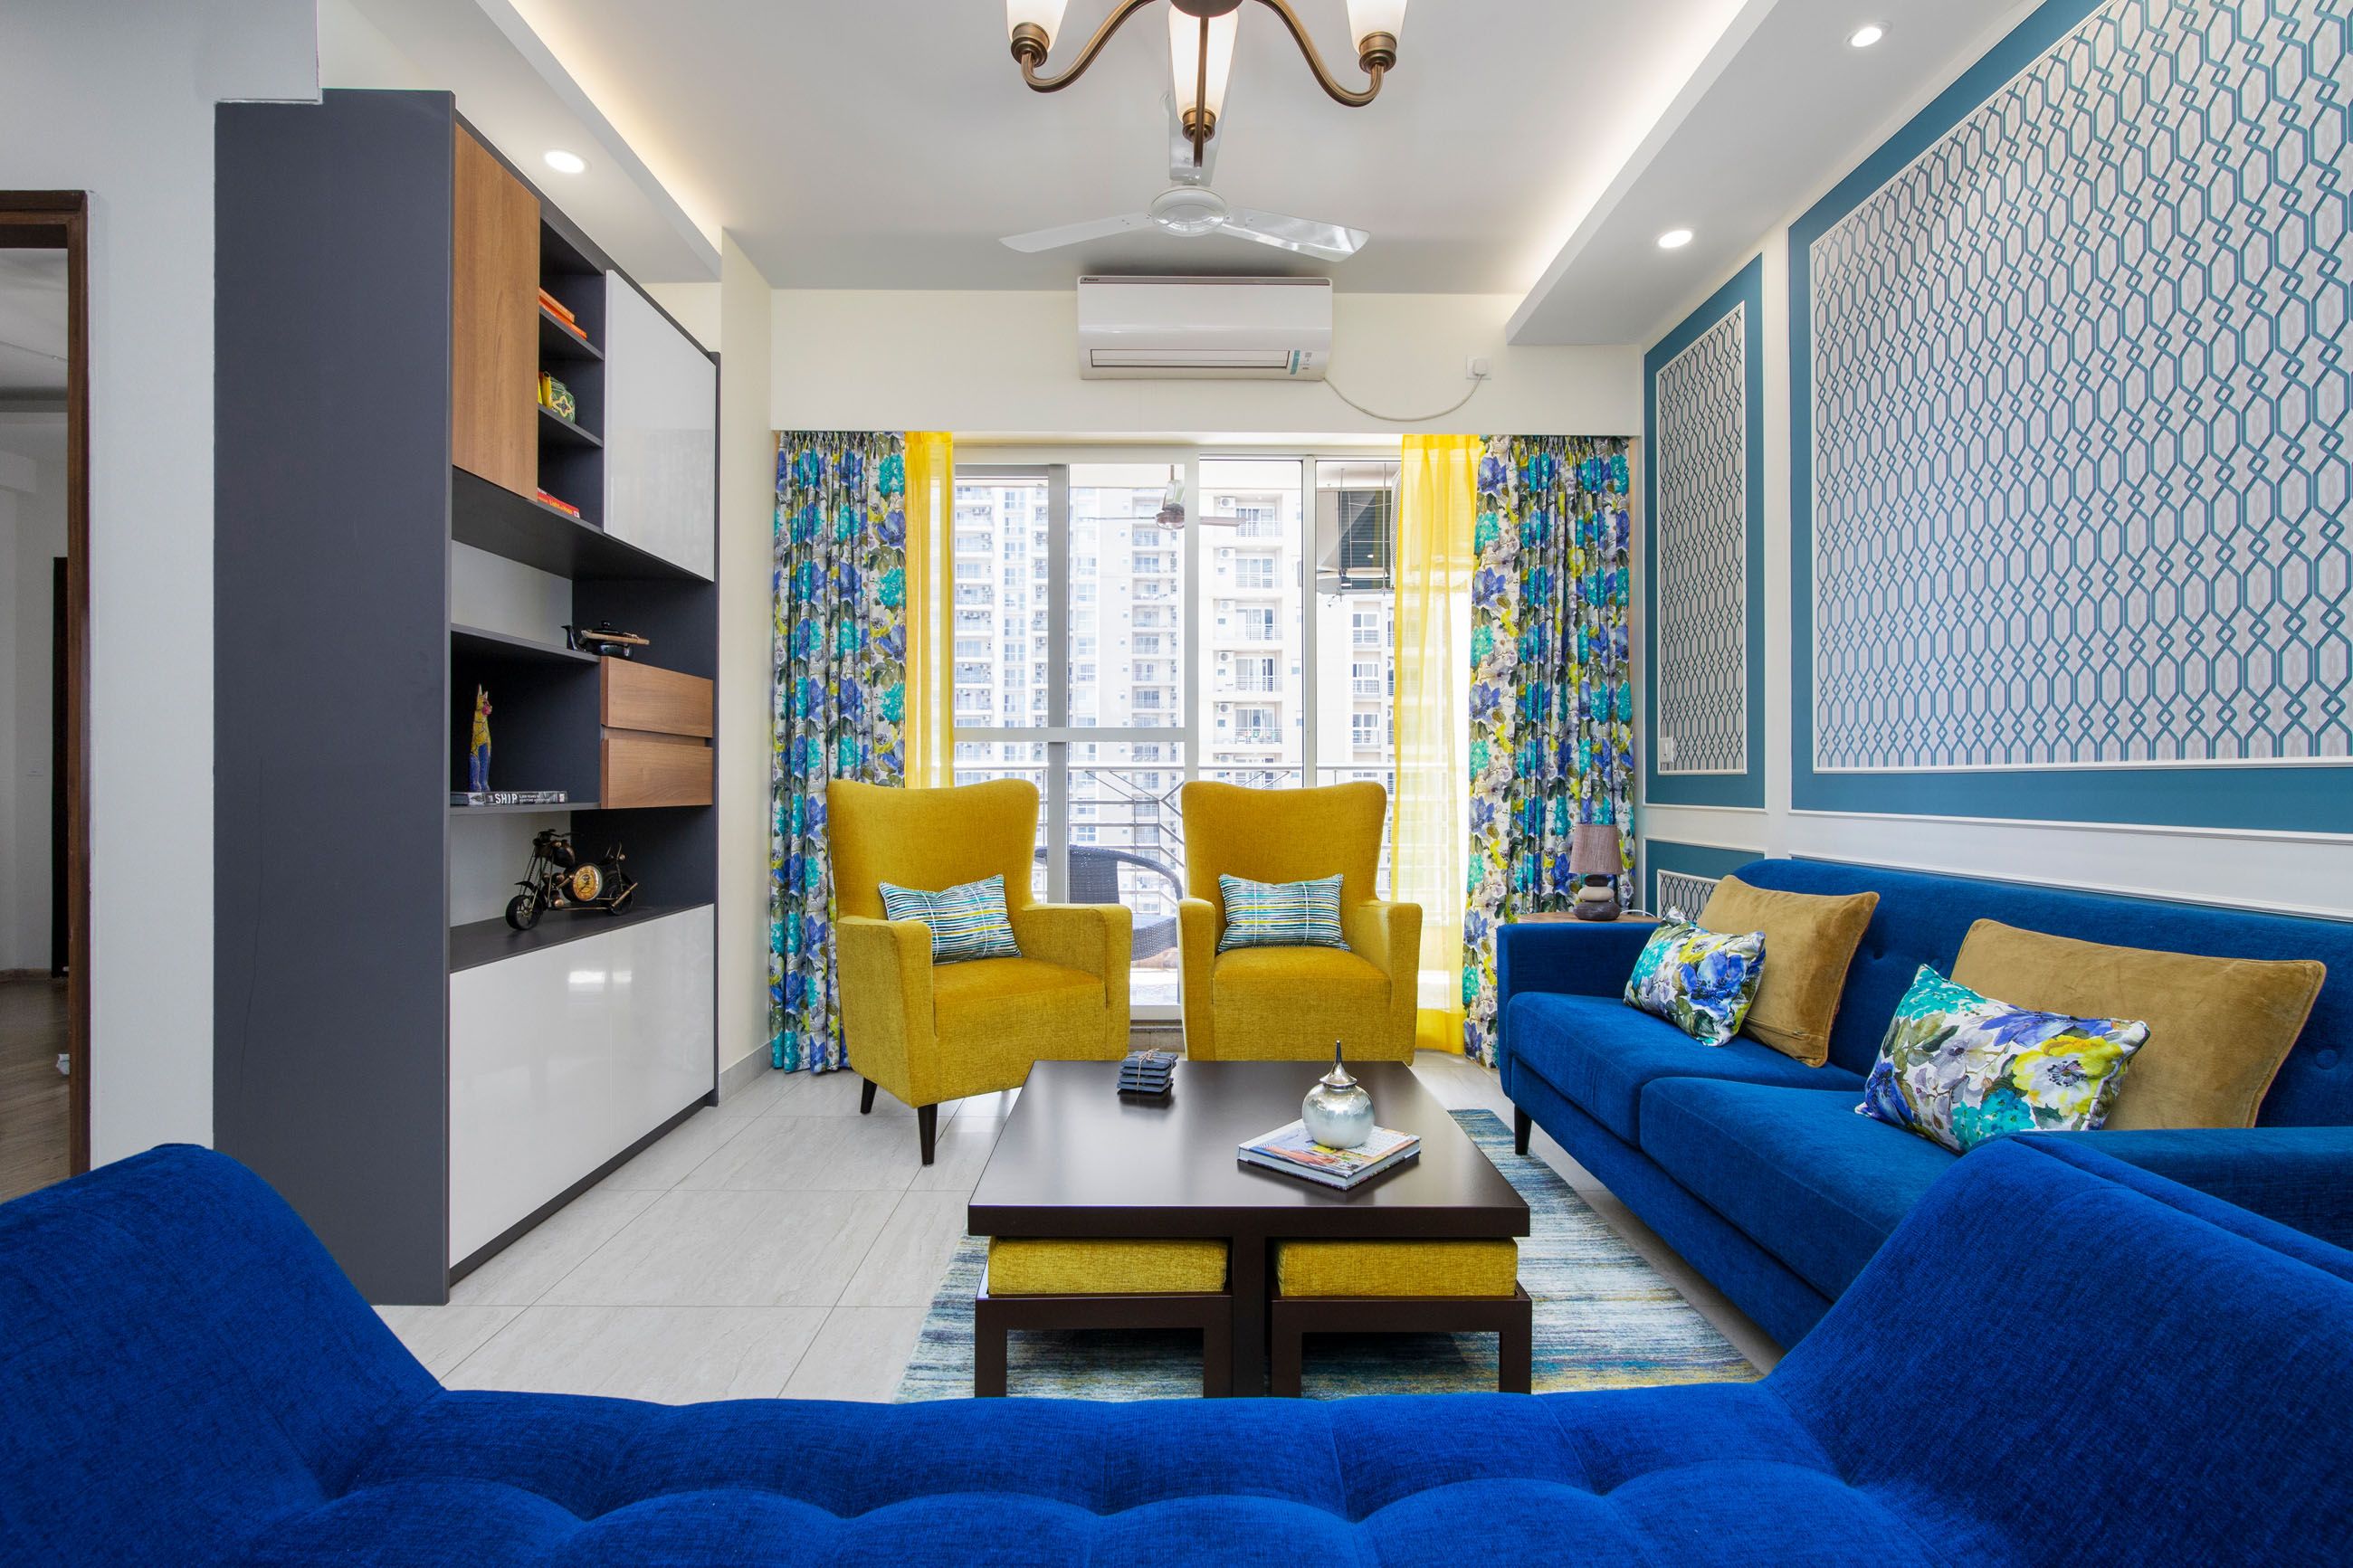 Contemporary 3-BHK Flat In Noida With Blue And Yellow Living Room Design